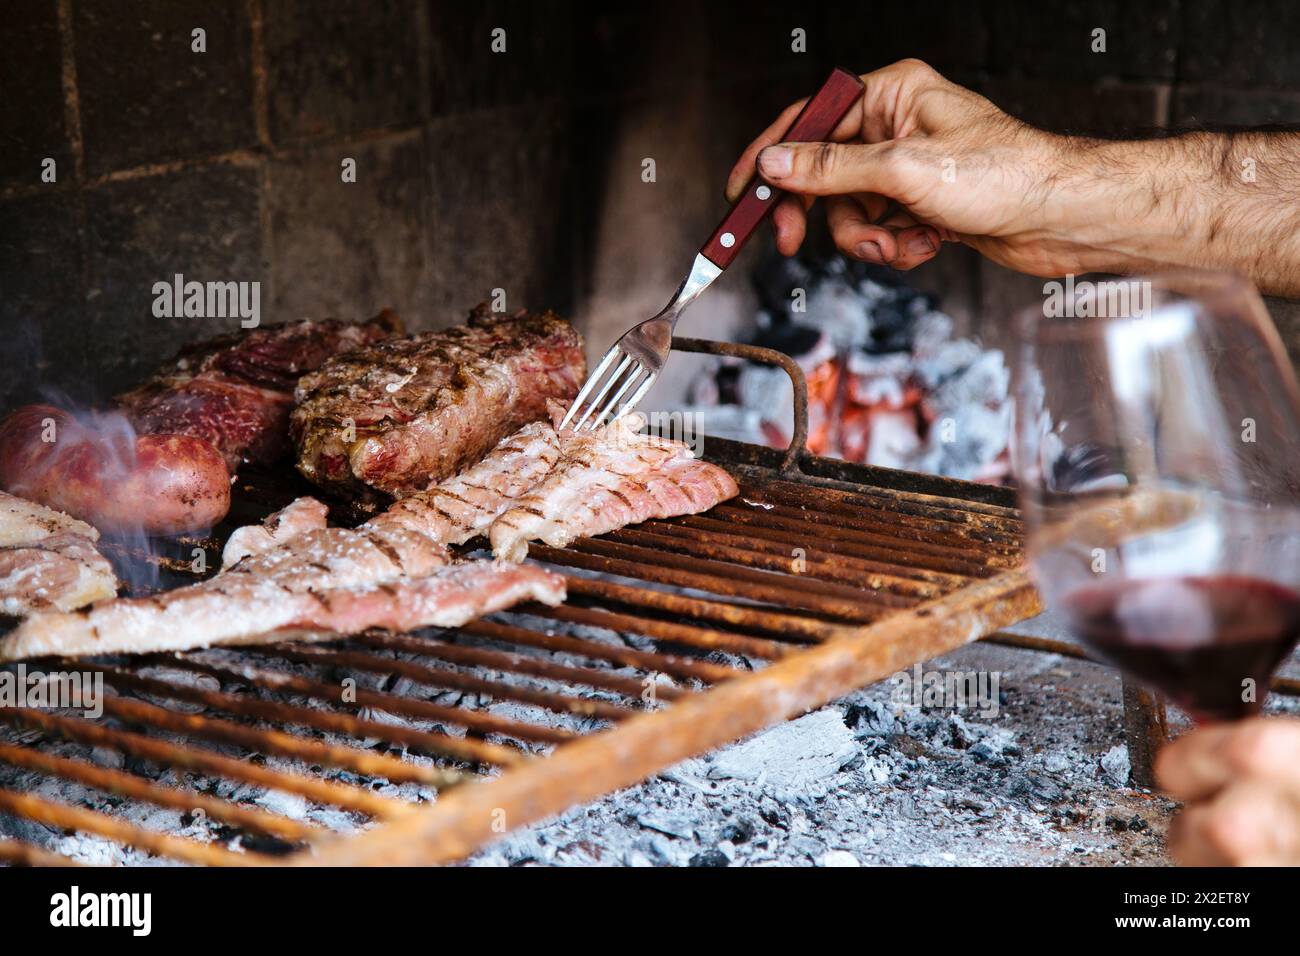 Man with a red wine cup making a barbeque, bbq meat cooking on grill. Traditional Asado of Argentina, Paraguay y Uruguay. Stock Photo